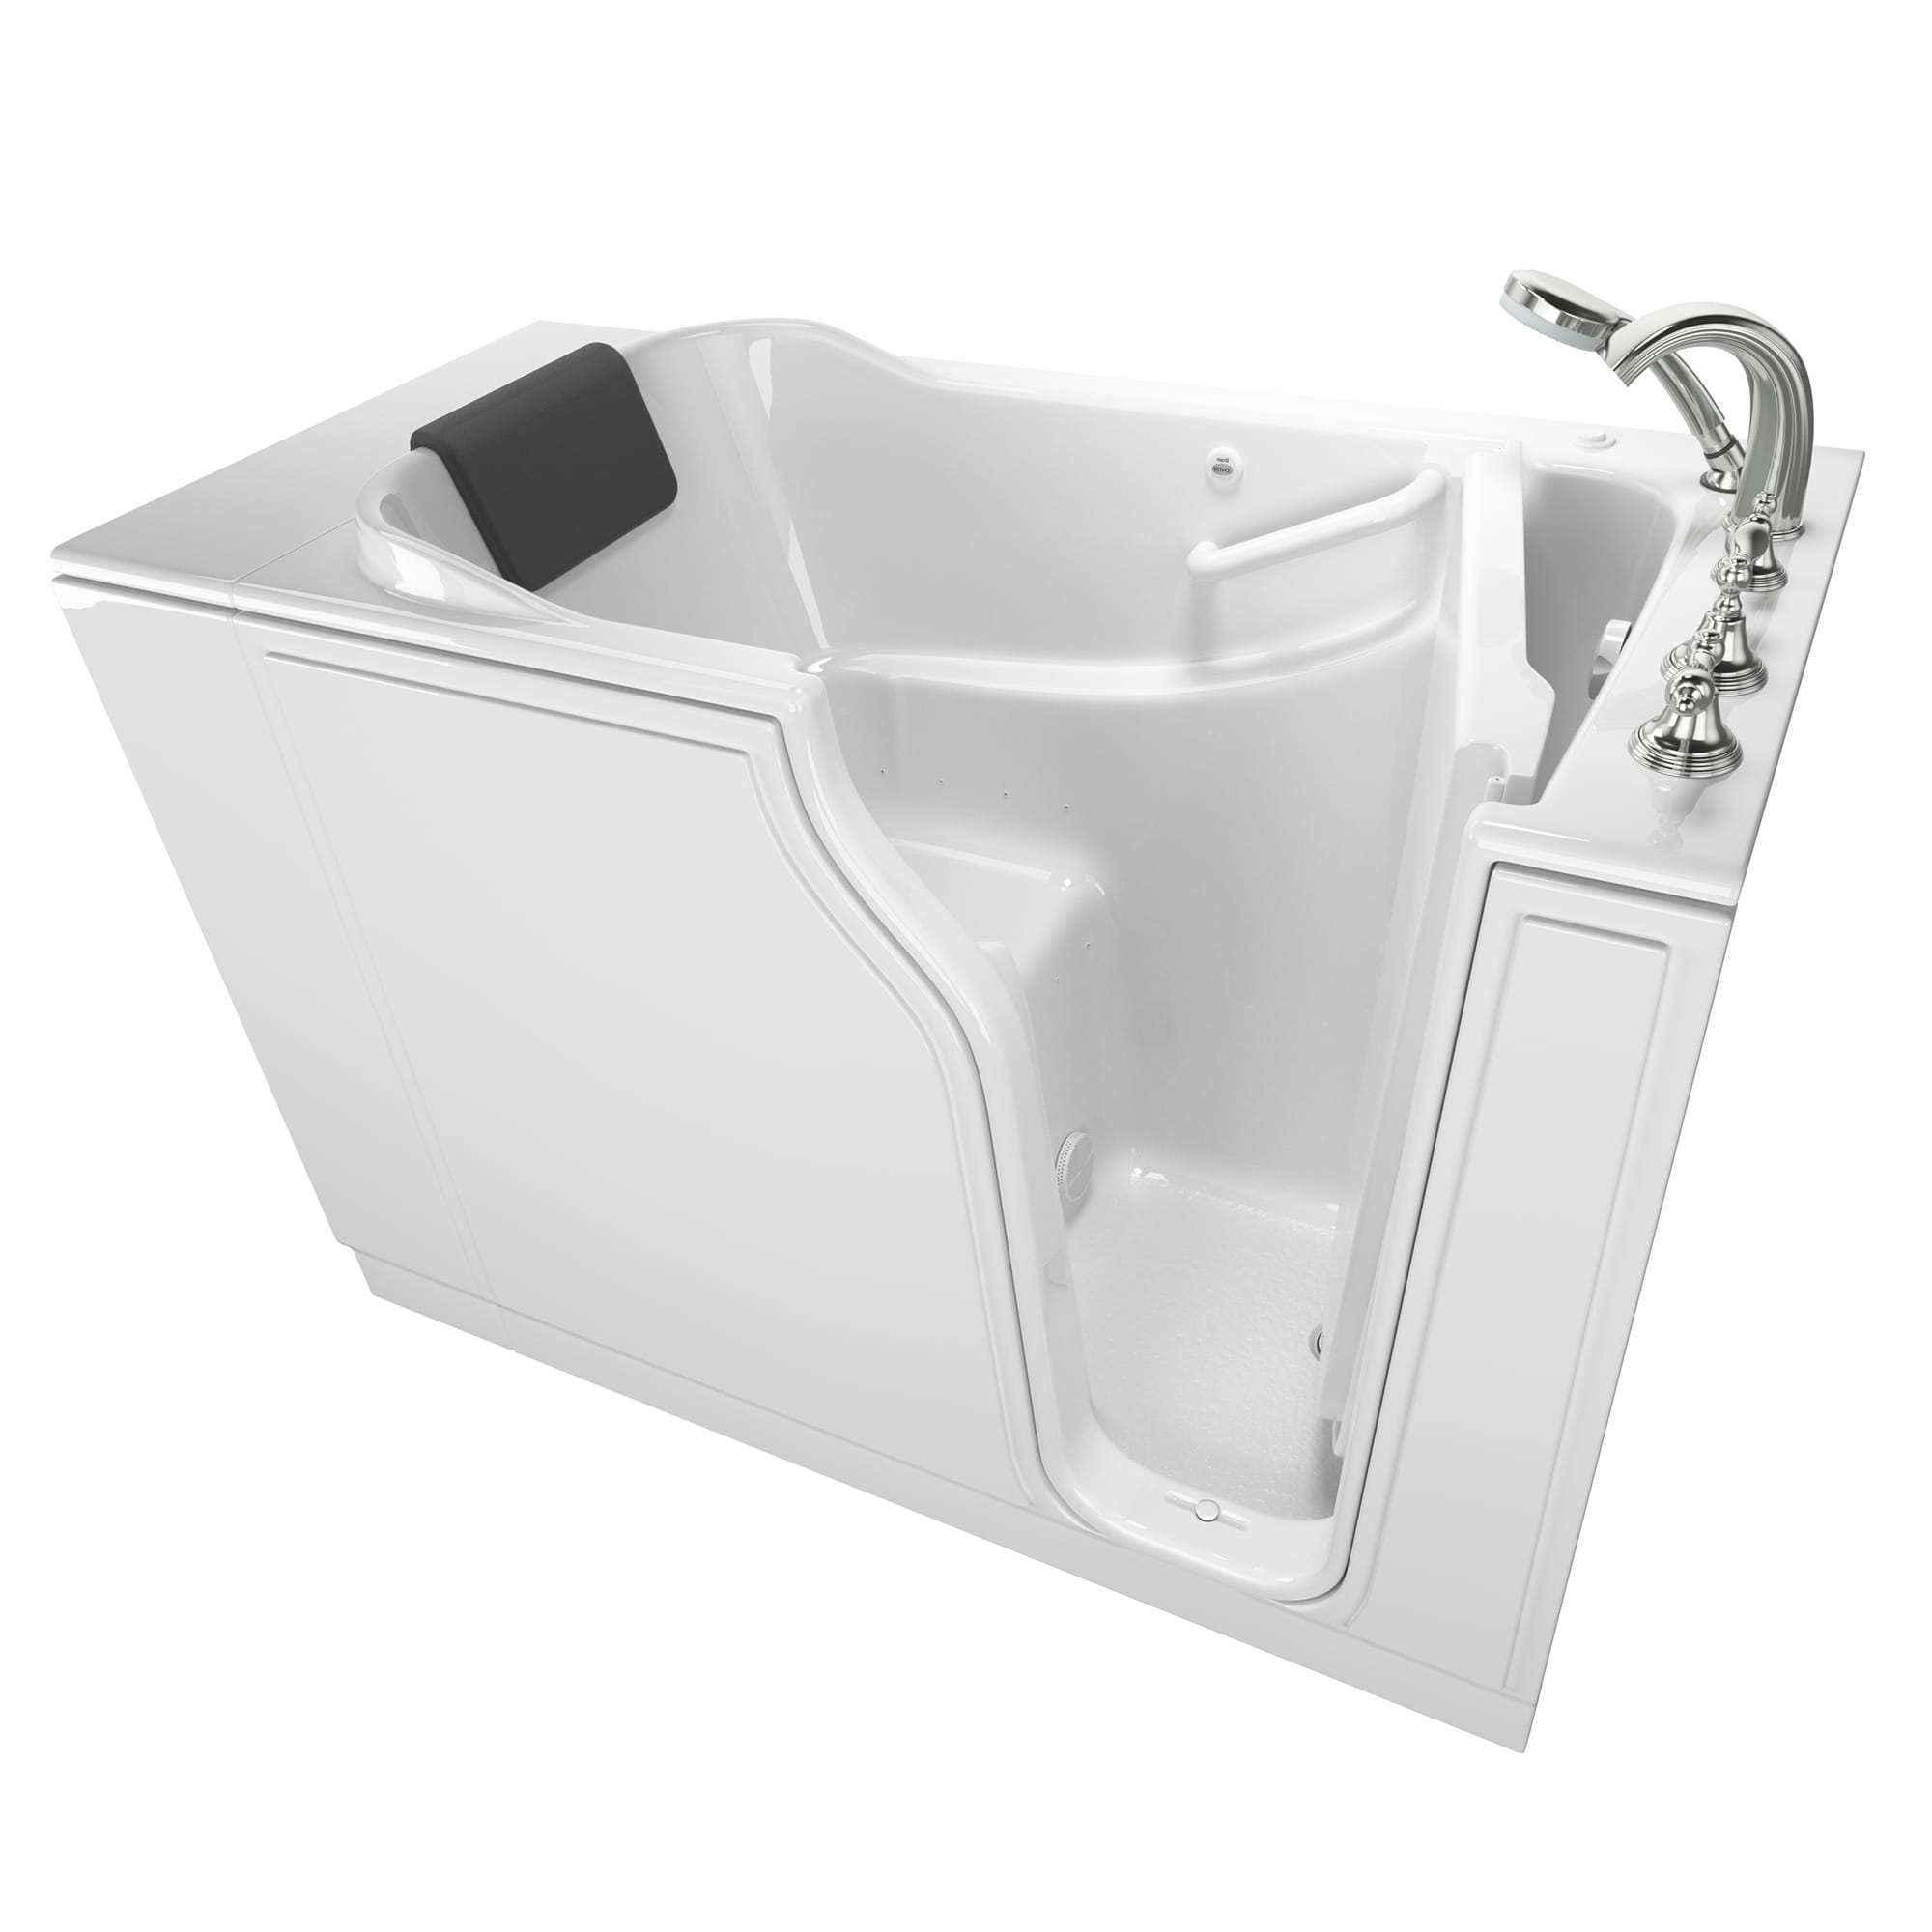 Gelcoat Premium Series 30 x 52 -Inch Walk-in Tub With Air Spa System - Right-Hand Drain With Faucet